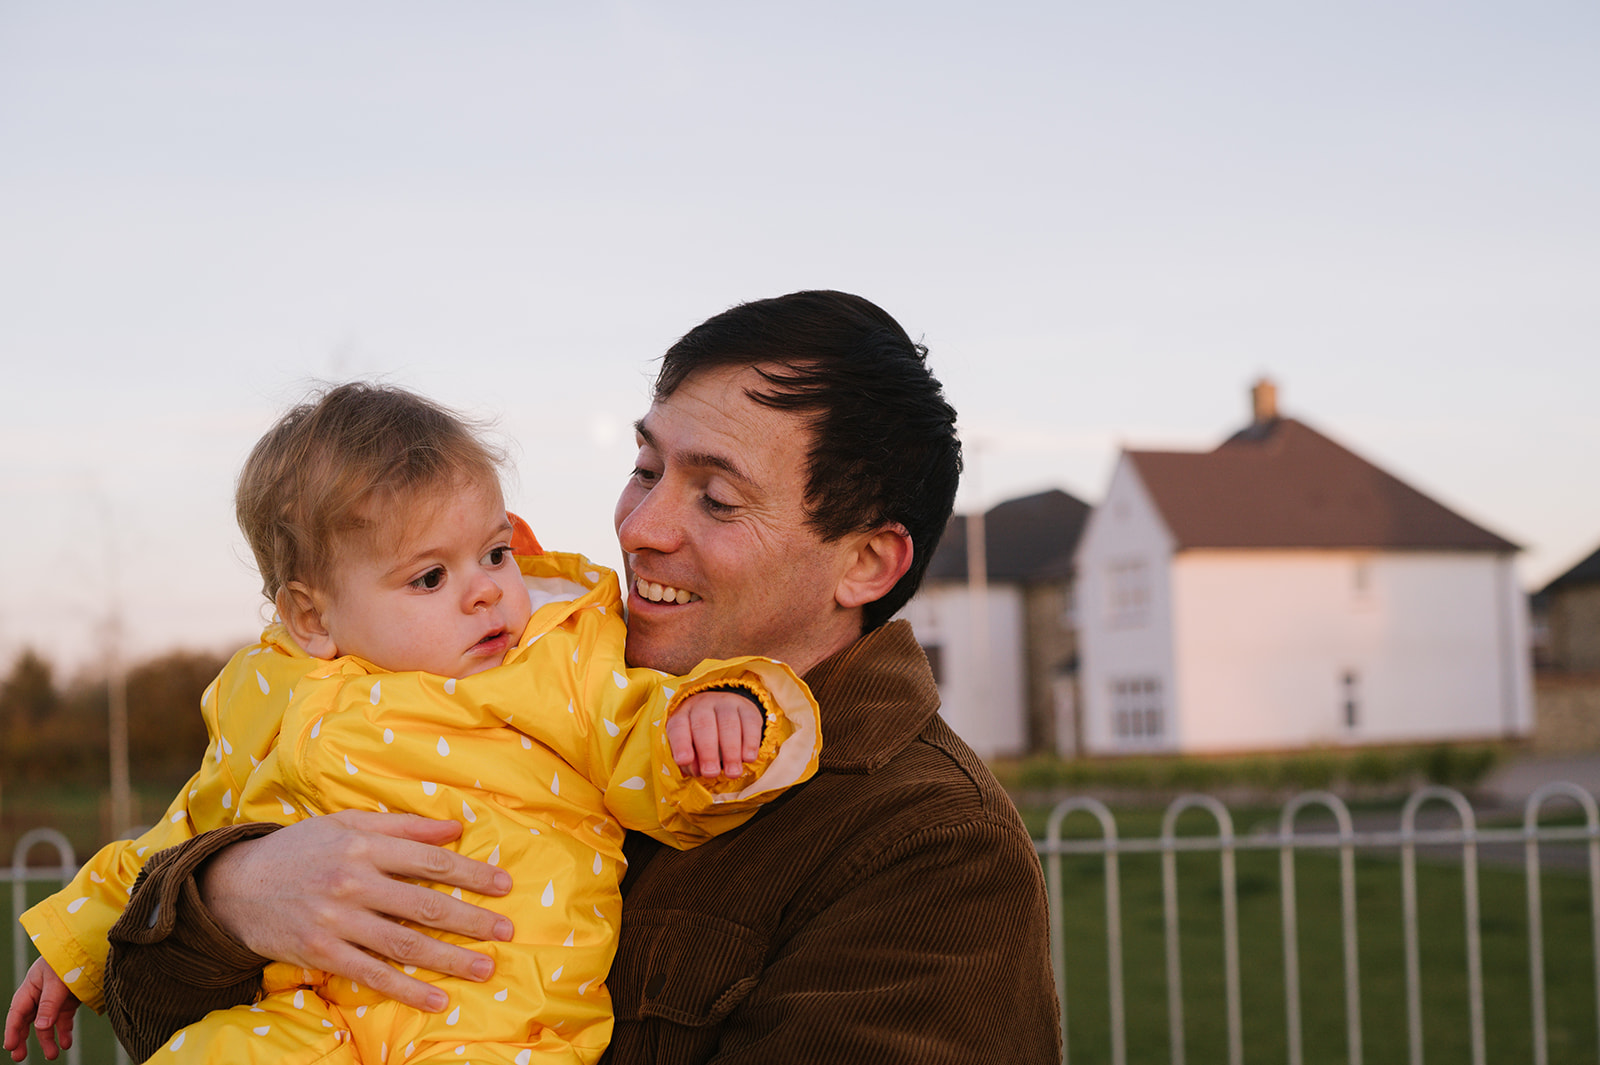 Dad holding his one year old son in the park, its golden hour and pink sunlight is shining on the buildings behind